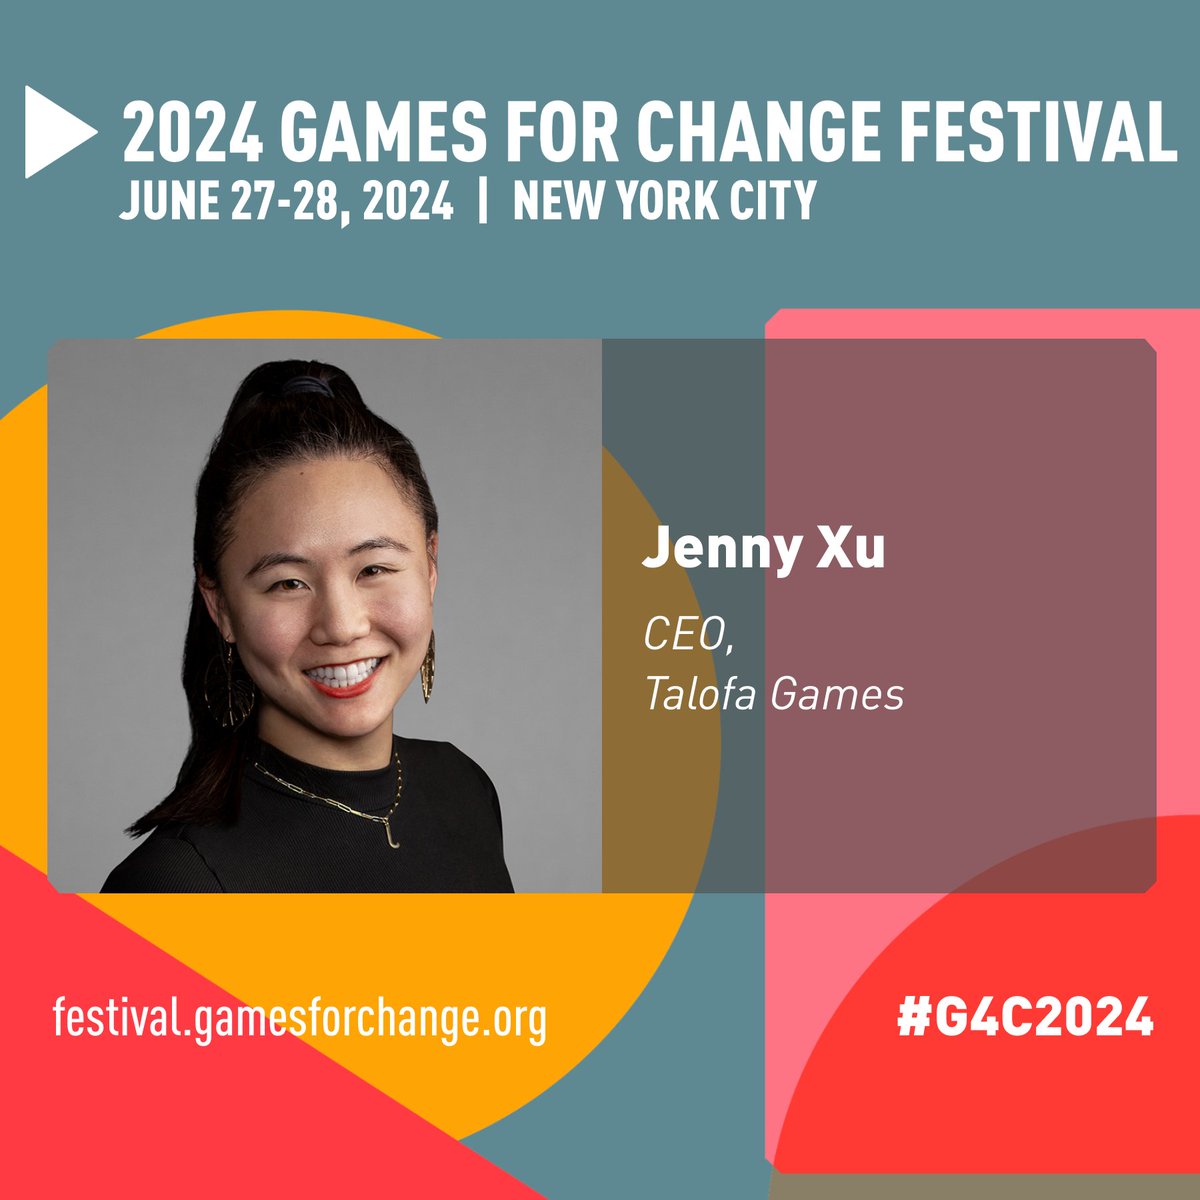 1/ Excited to join @G4C Festival in NYC, 6/27-6/28! I’ll be doing a talk on 'Partnering with Nonprofits within Gaming for Fundraising and Visibility'. Honored to represent @PlayRunLegends and talk about our work with the @RedCross and Run Legends!

#G4C2024